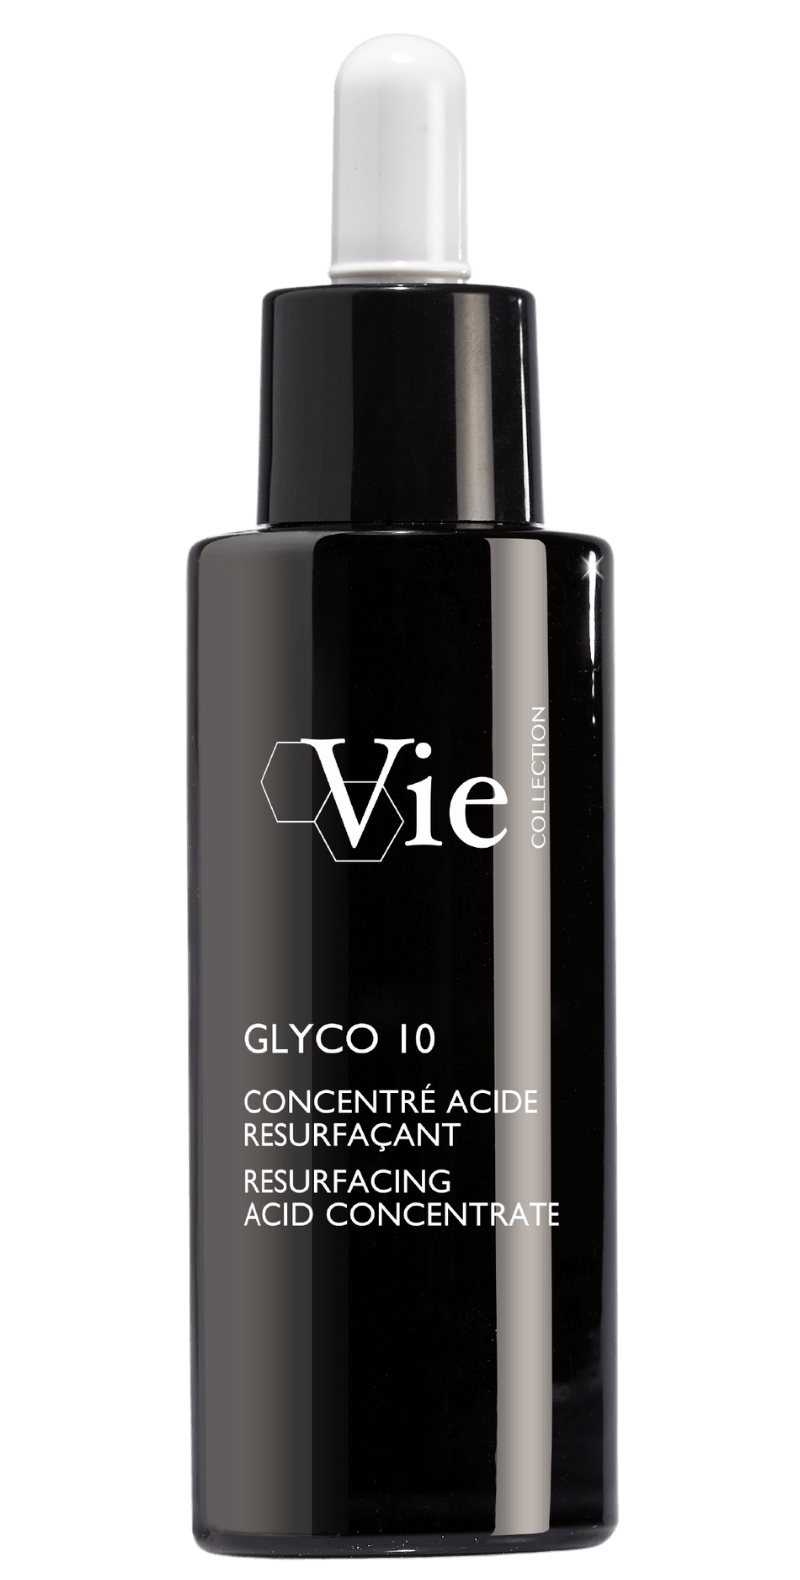 's Vie GLYCO 10 Resurfacing Acid Concentrate - Bellini's Skin and Parfumerie 